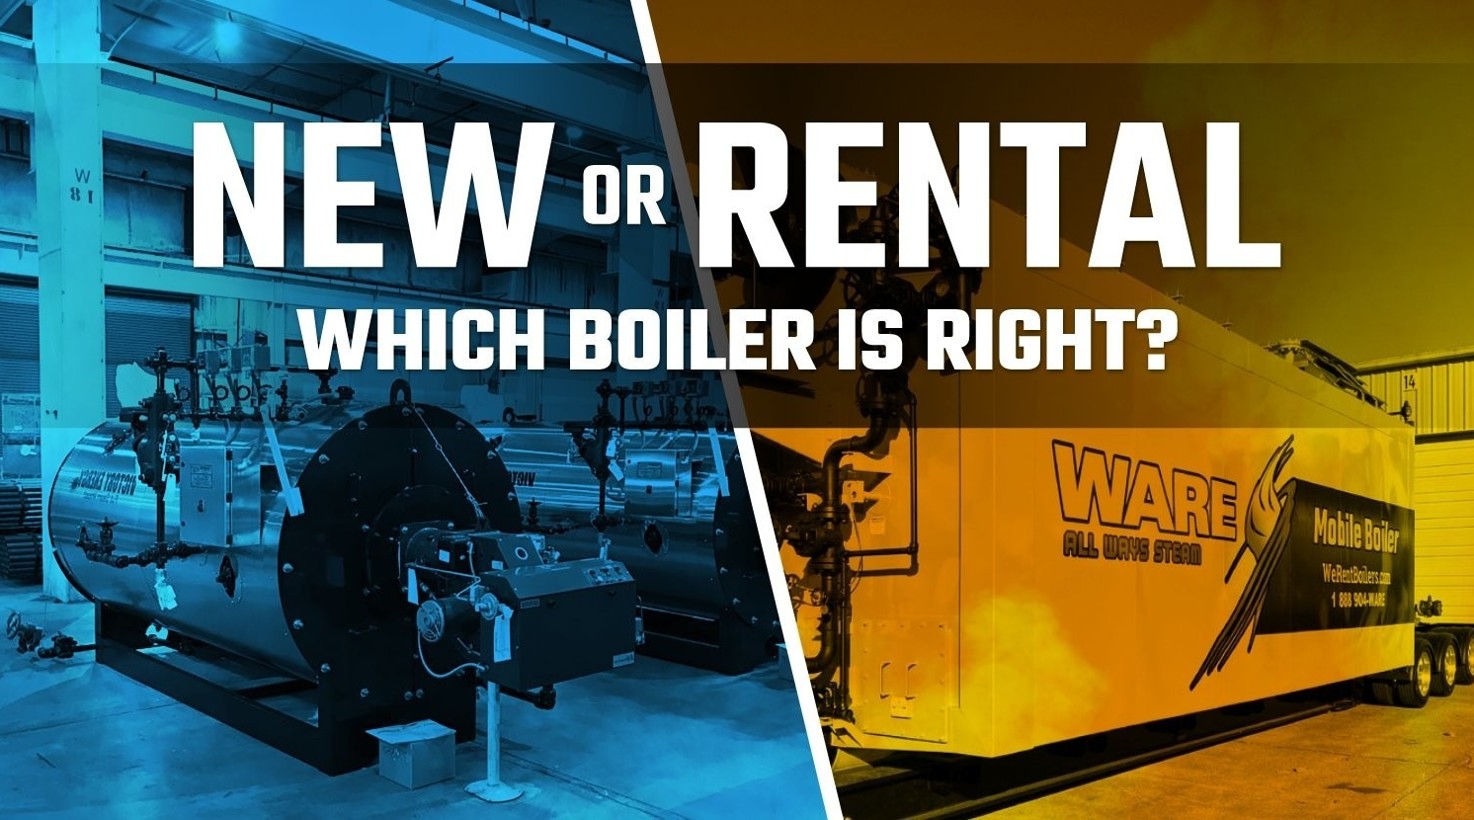 New or Rental: Which Boiler is Right?